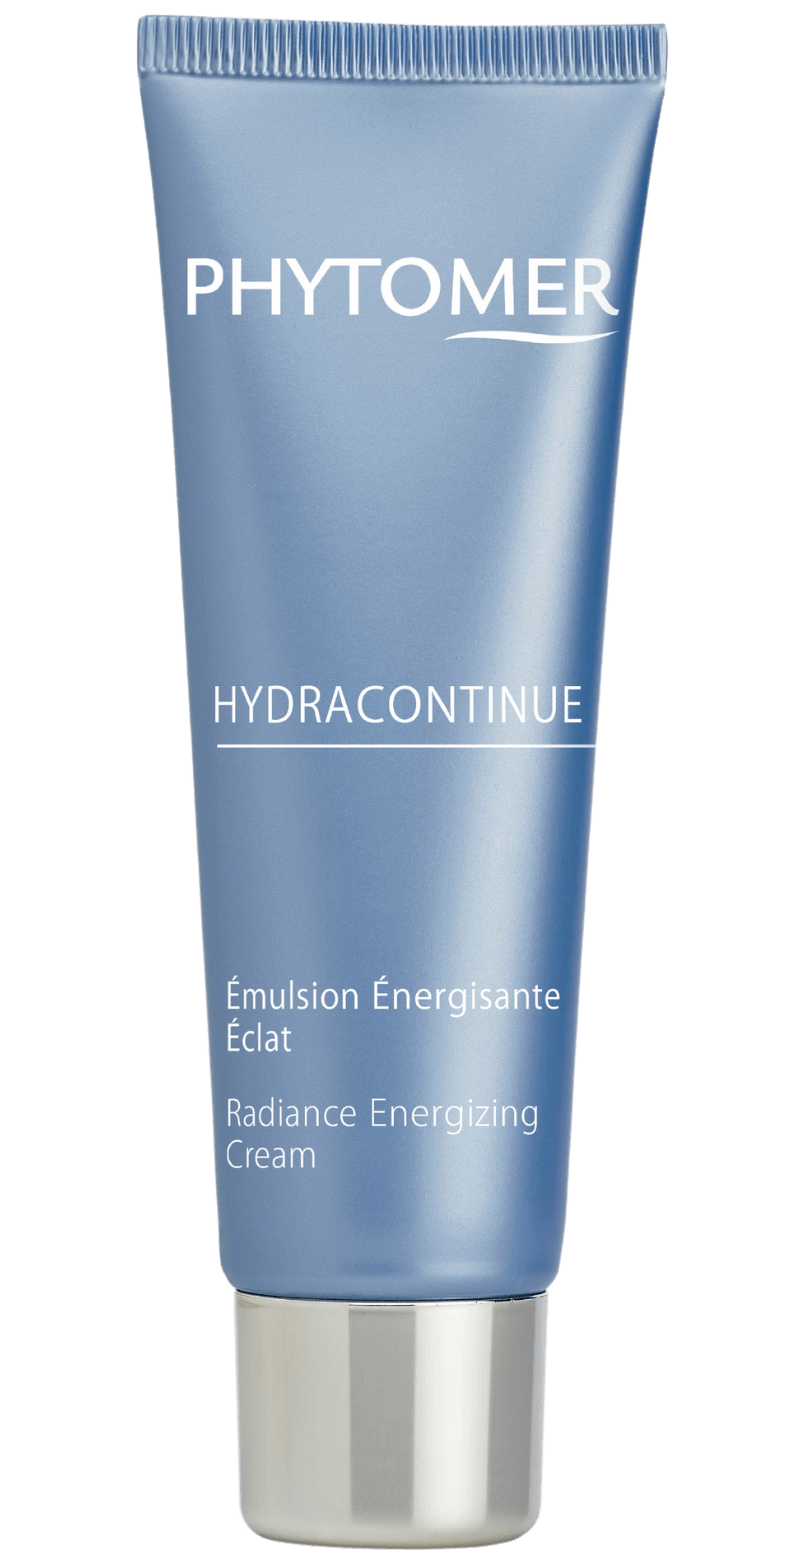 &#39;s Phytomer HYDRACONTINUE Radiance Energizing Cream - Bellini&#39;s Skin and Parfumerie 